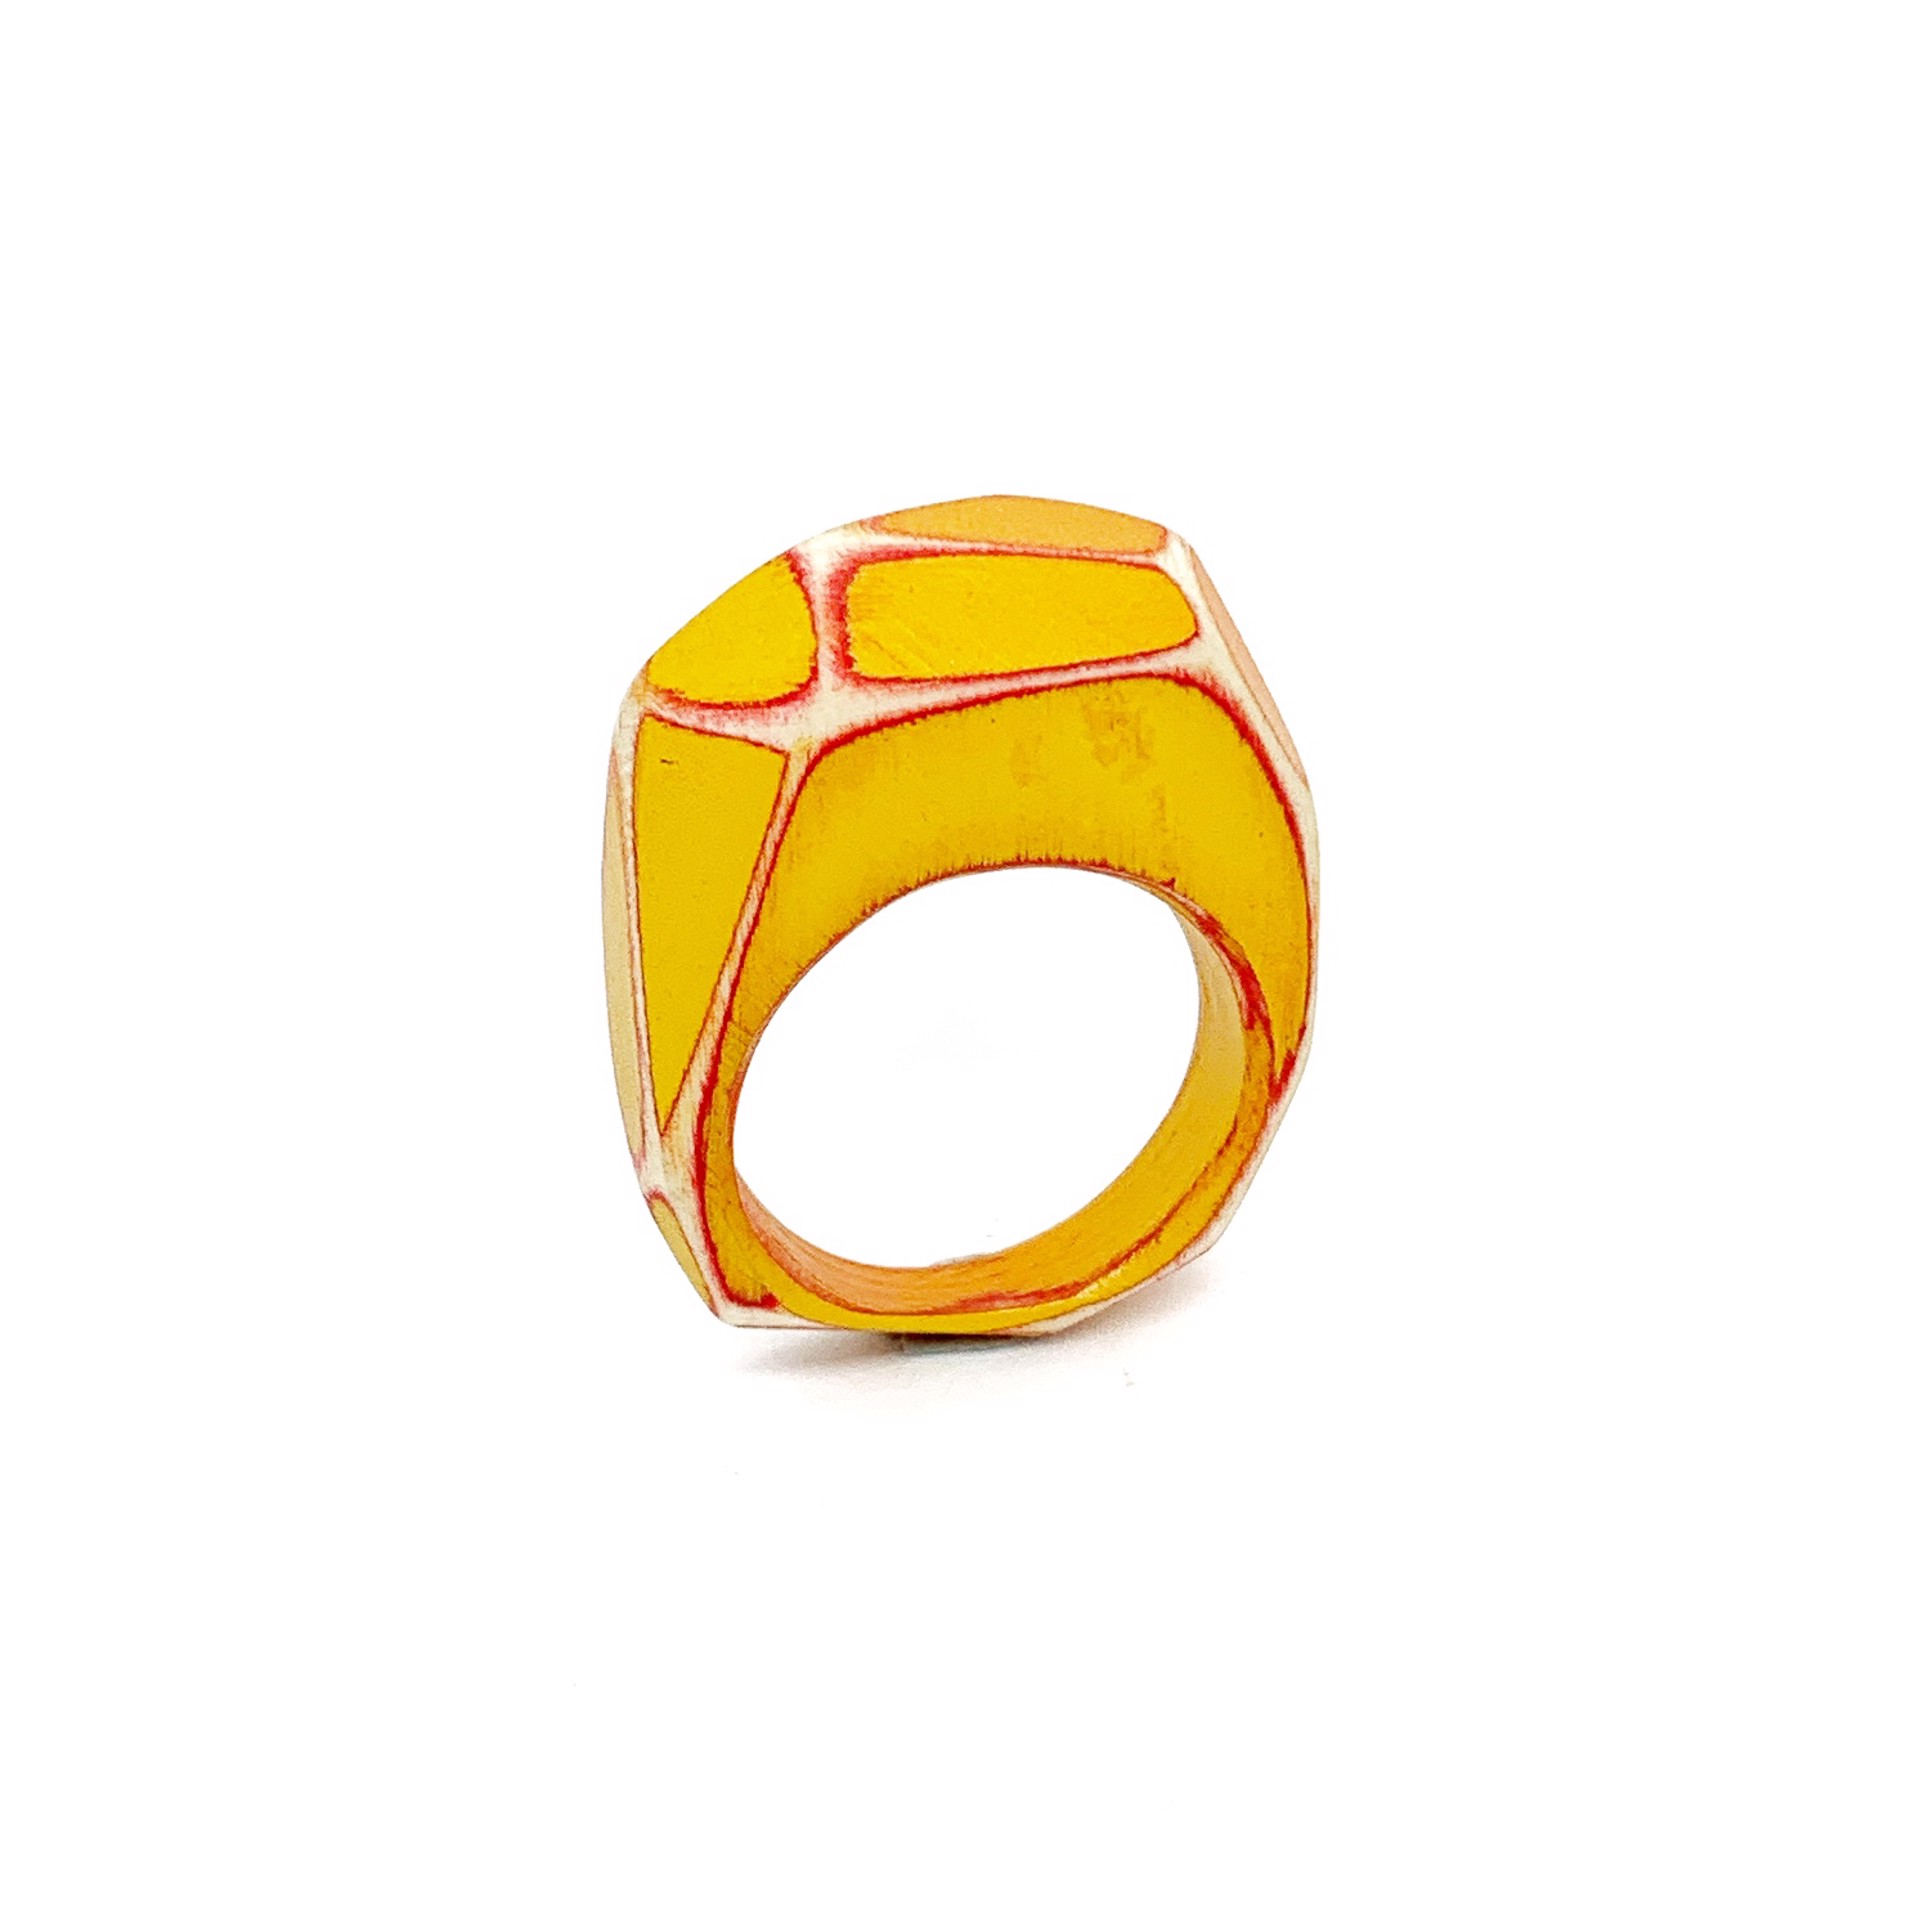 Multifaceted Ring (regular) by Bad Habits by Morgan Hill